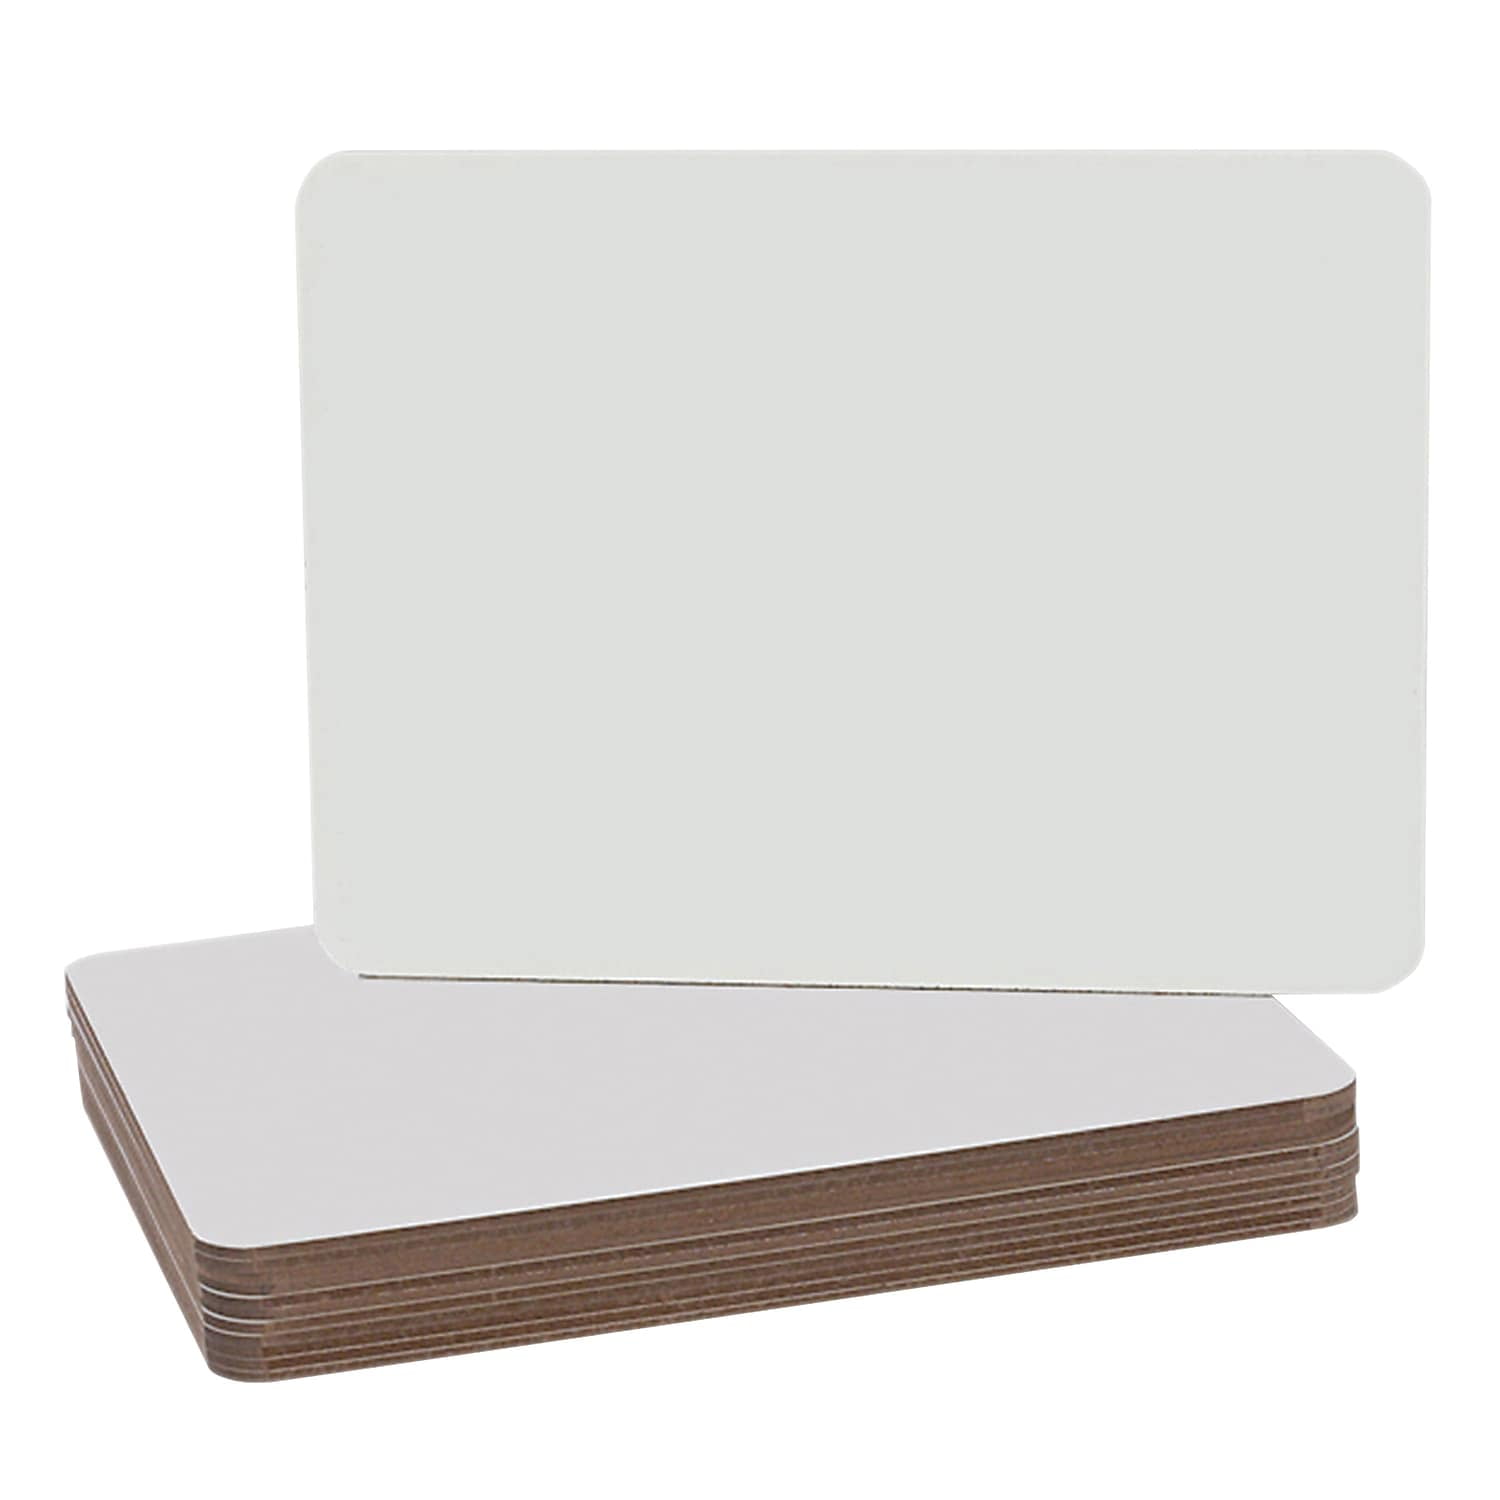 Details about   3 White Magnetic Vinyl Squares 11 1/4  X 11 1/4  inches .030 Rounded Corners. 